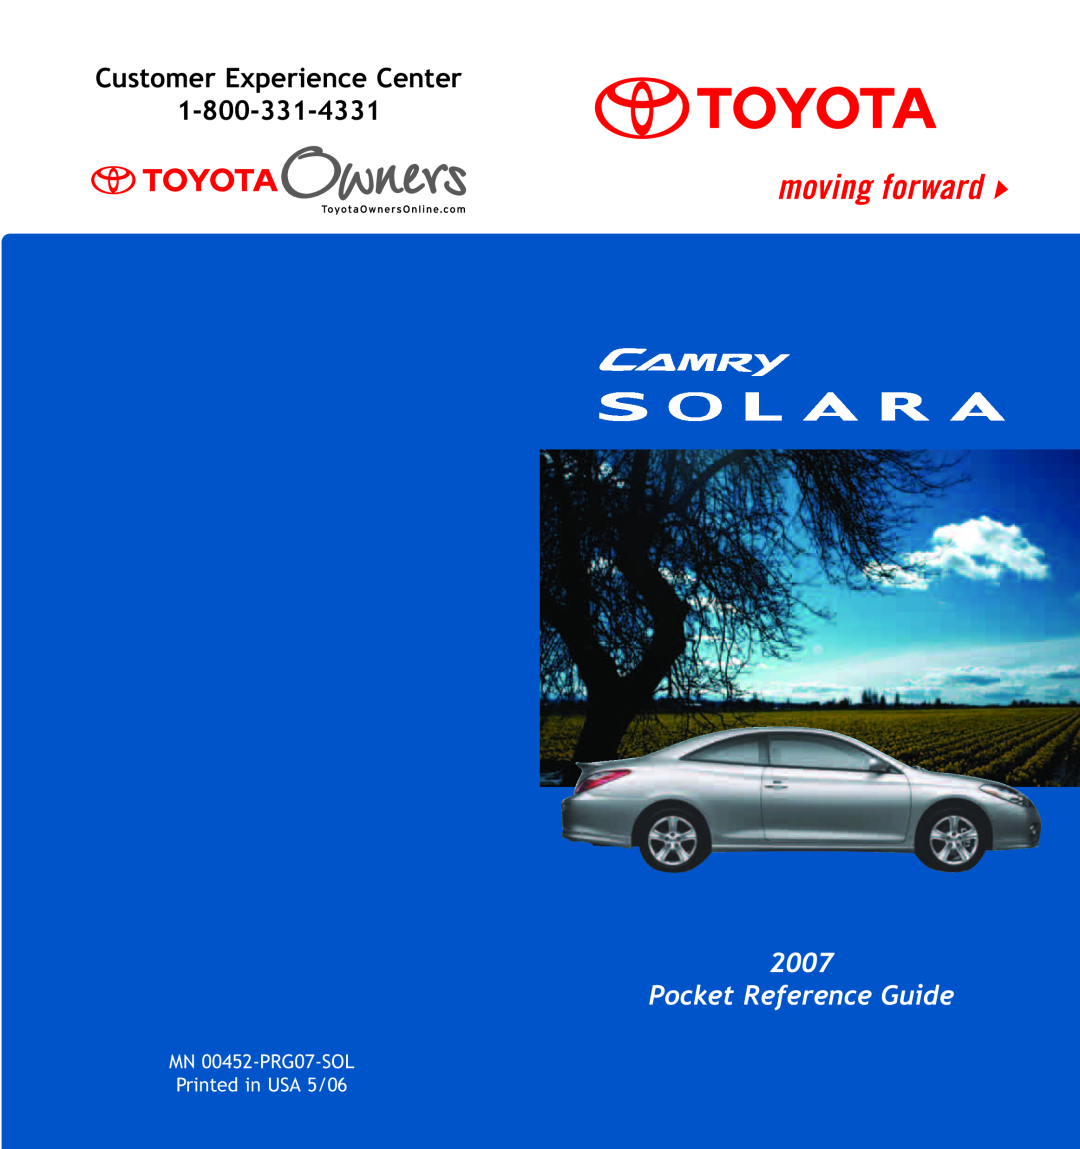 Toyota 00452-PRG07-SOL manual Customer Experience Center, Pocket Reference Guide 